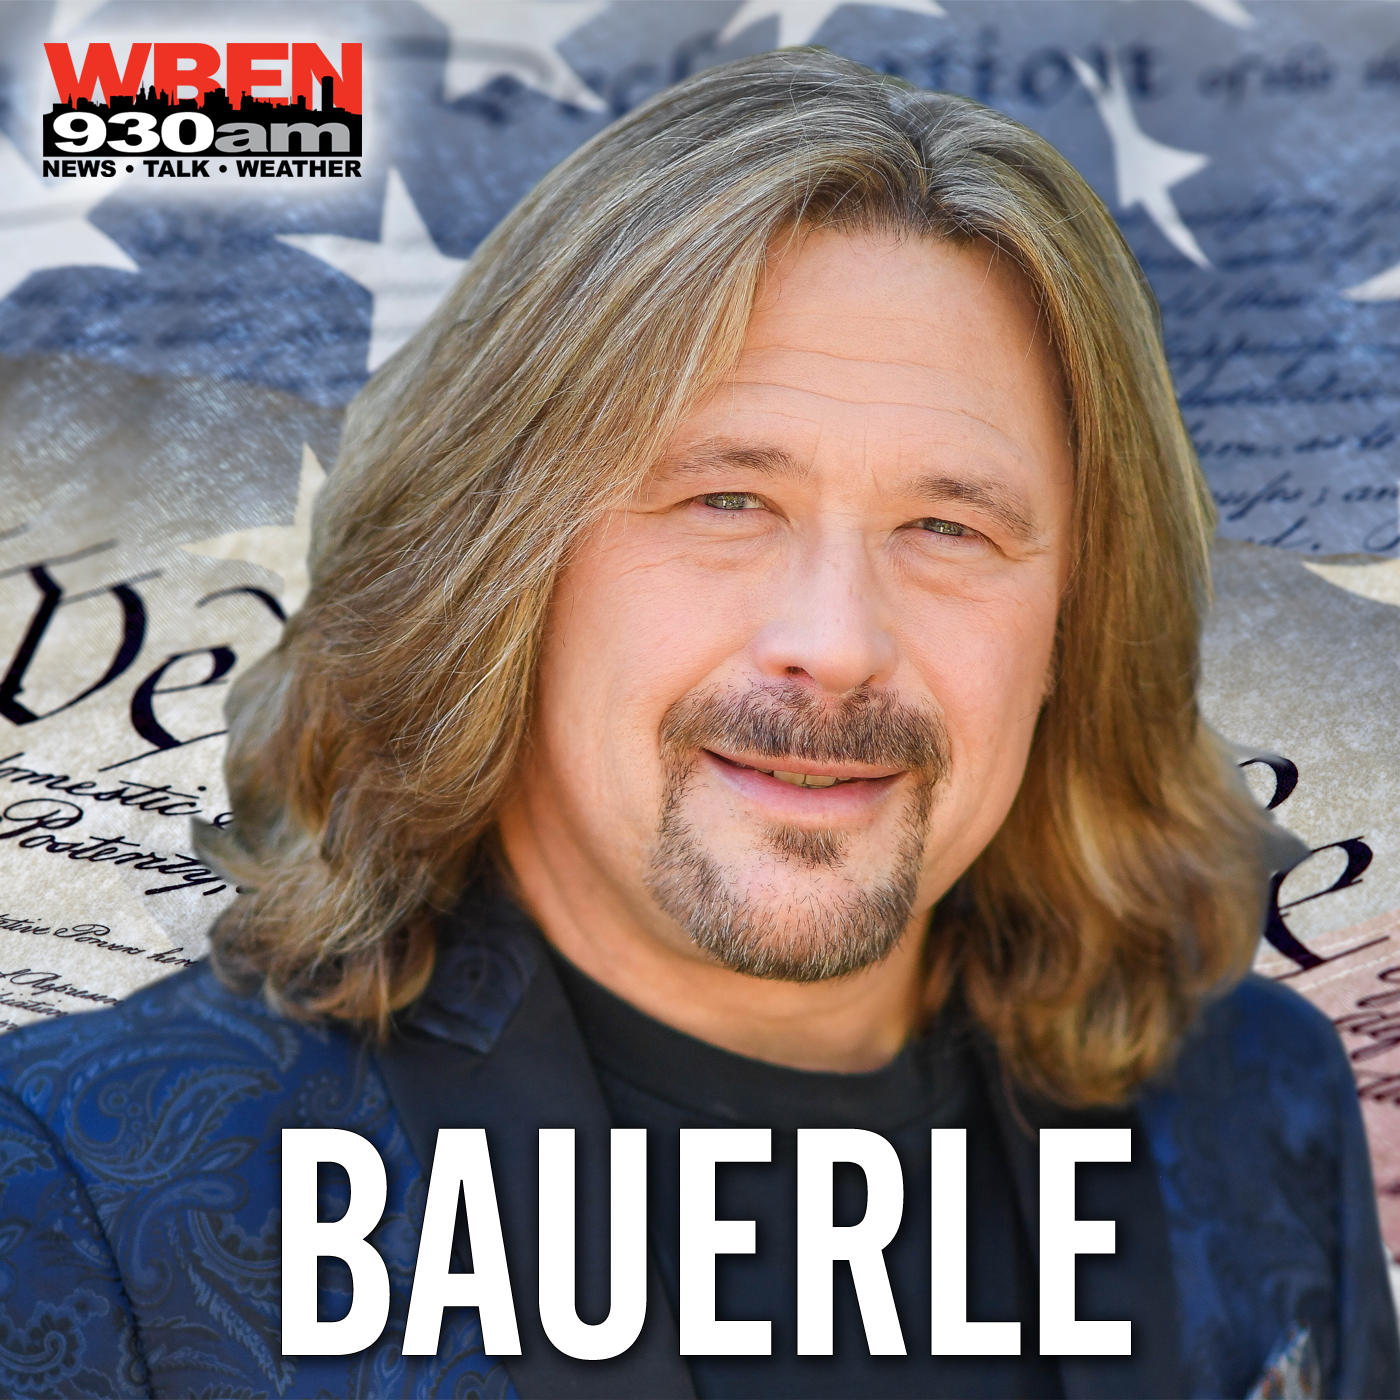 11-13 Bauerle and Bellavia: Live with James Faluszczak